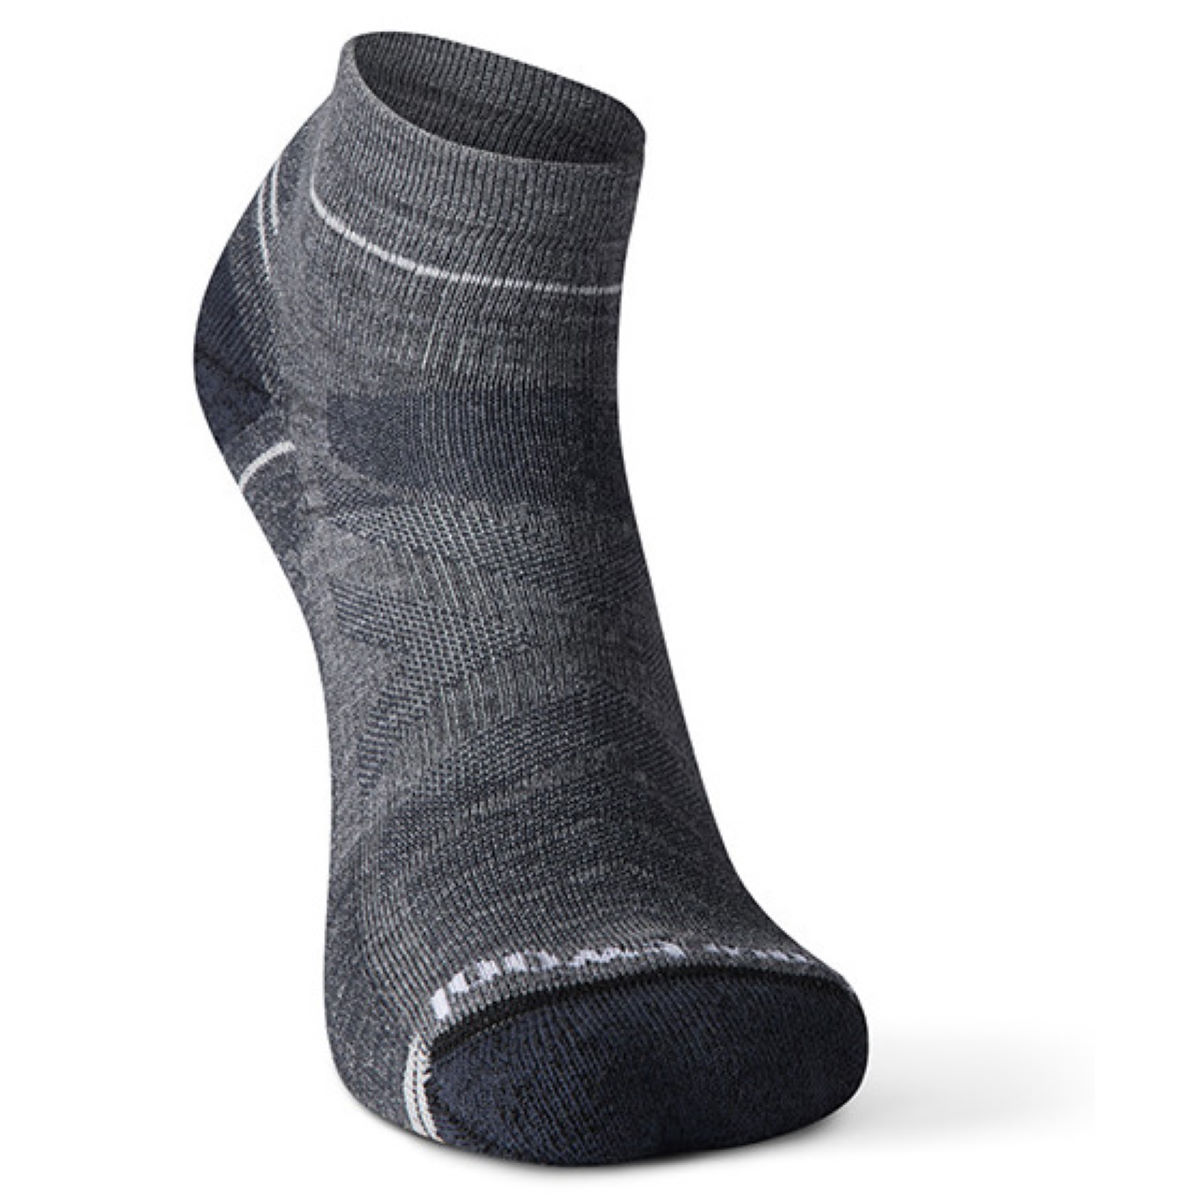 Calcetines tobilleros Smartwool Performance Hike (acolchamiento ligero) - Calcetines